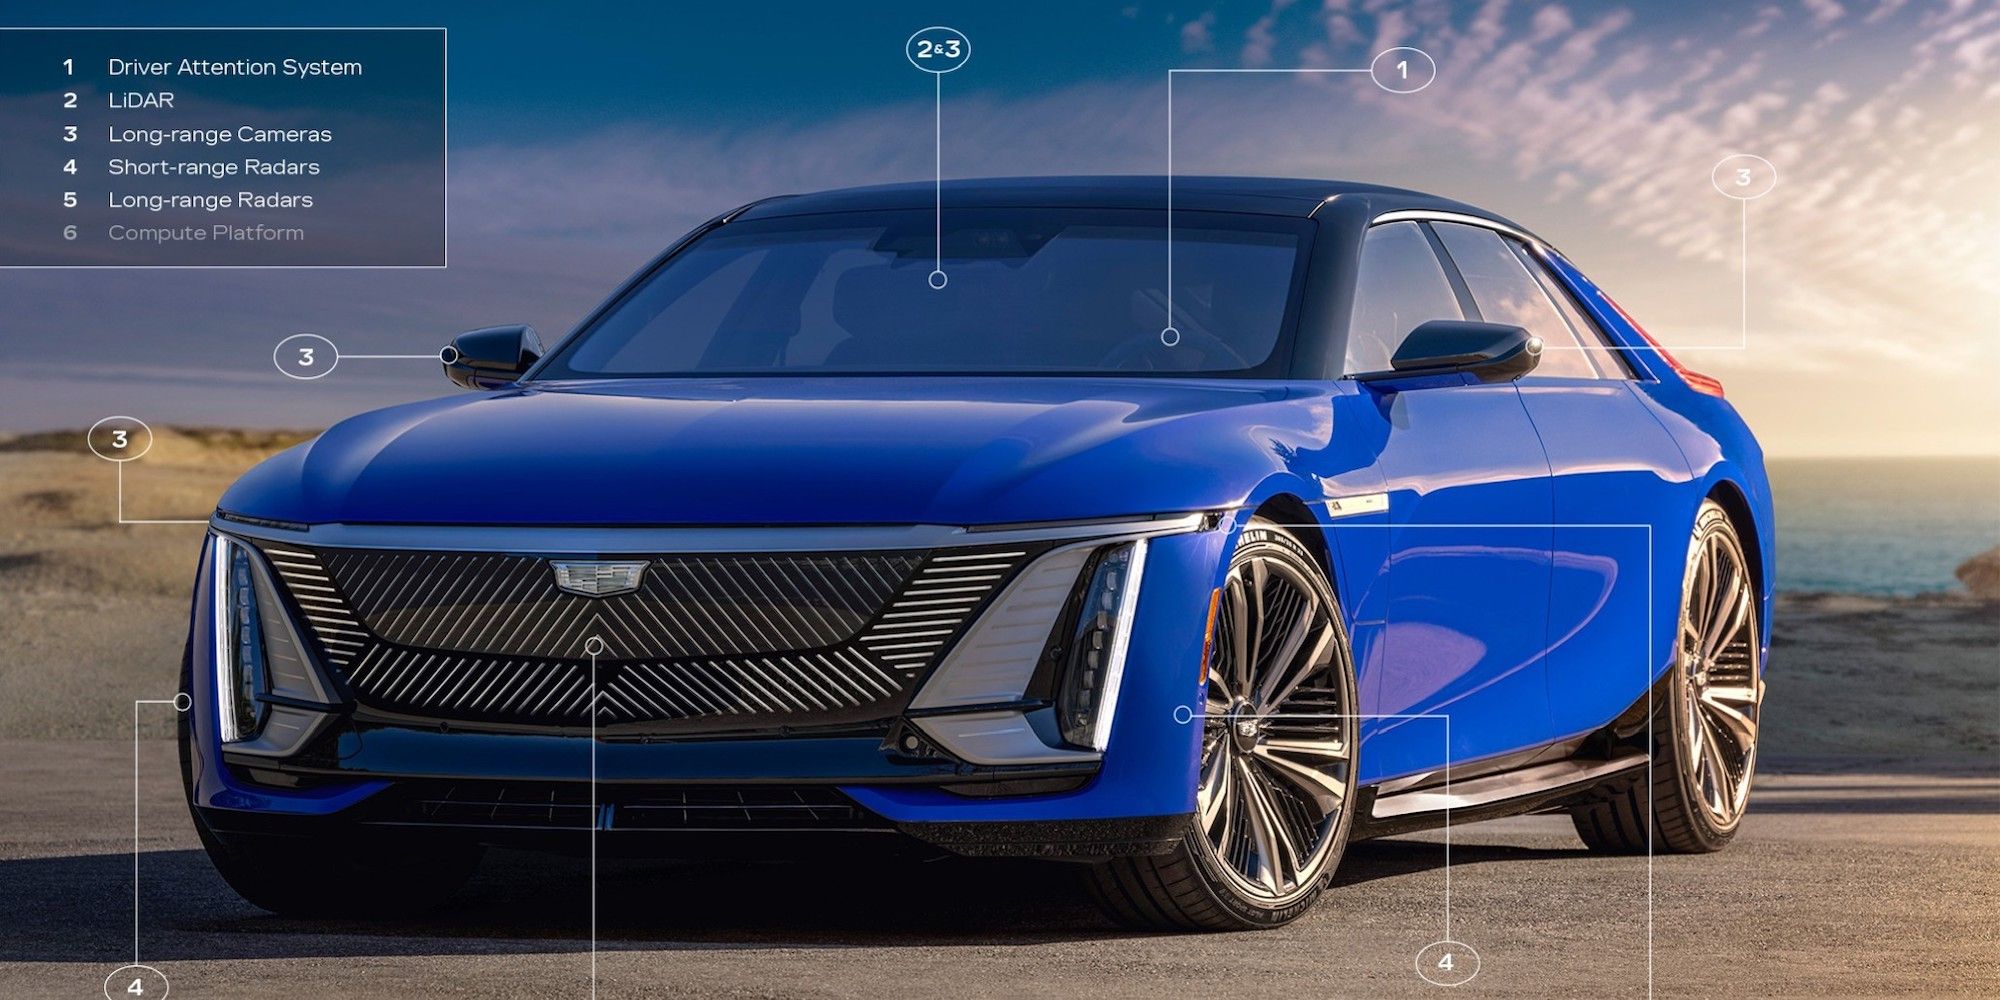 GM Ultra Cruise features on the Cadillac Celestiq